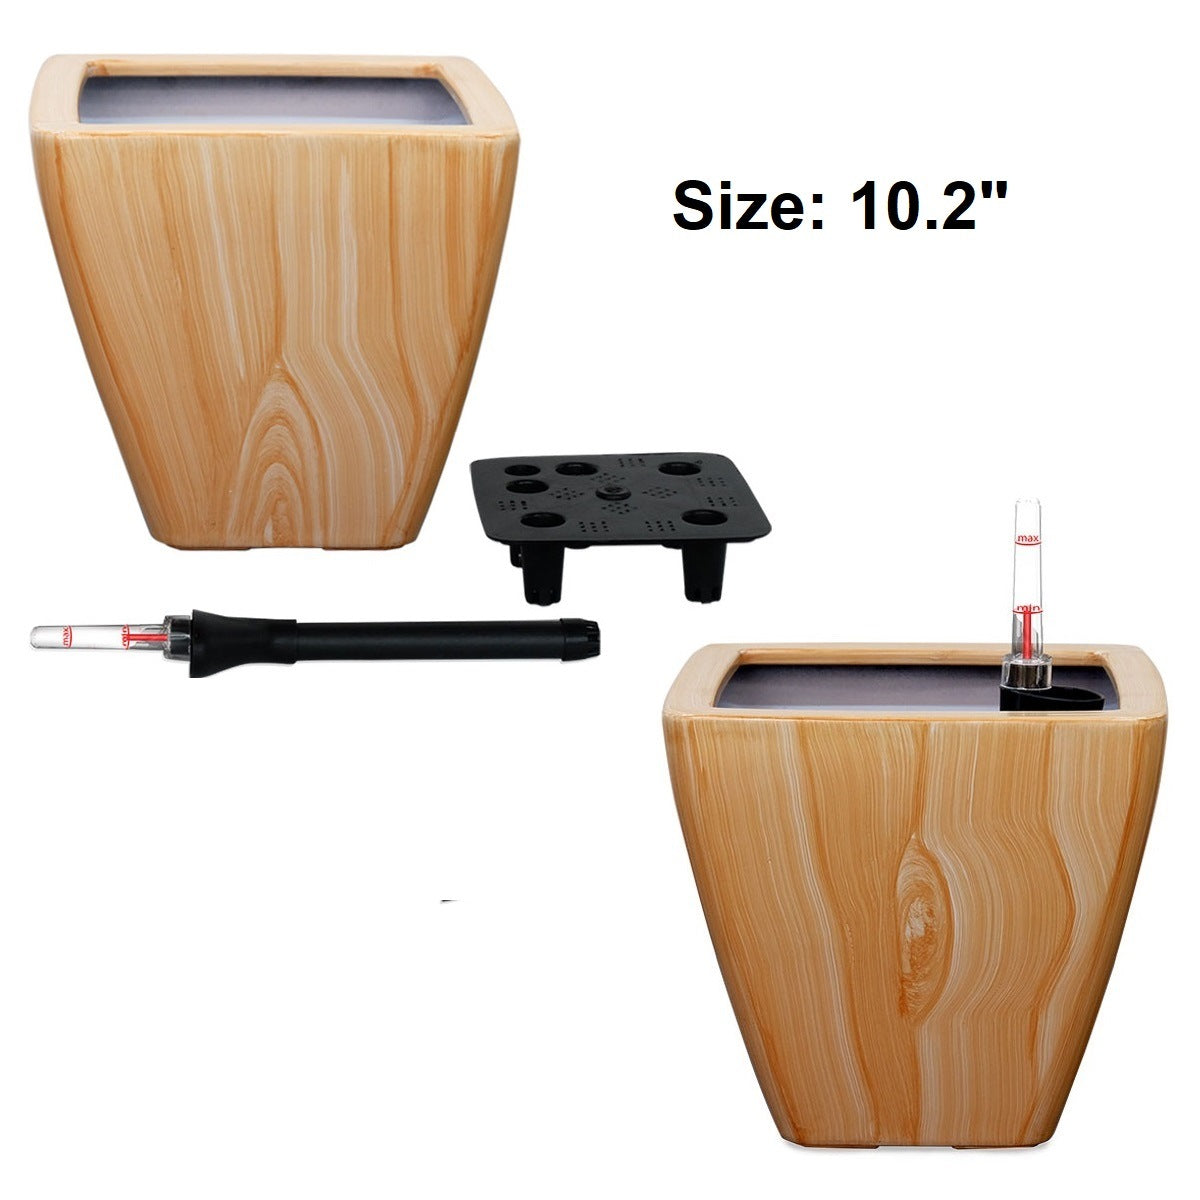 2-Pack Smart Self-watering Planter Pot for Indoor and Outdoor - Light Wood - Square Cone